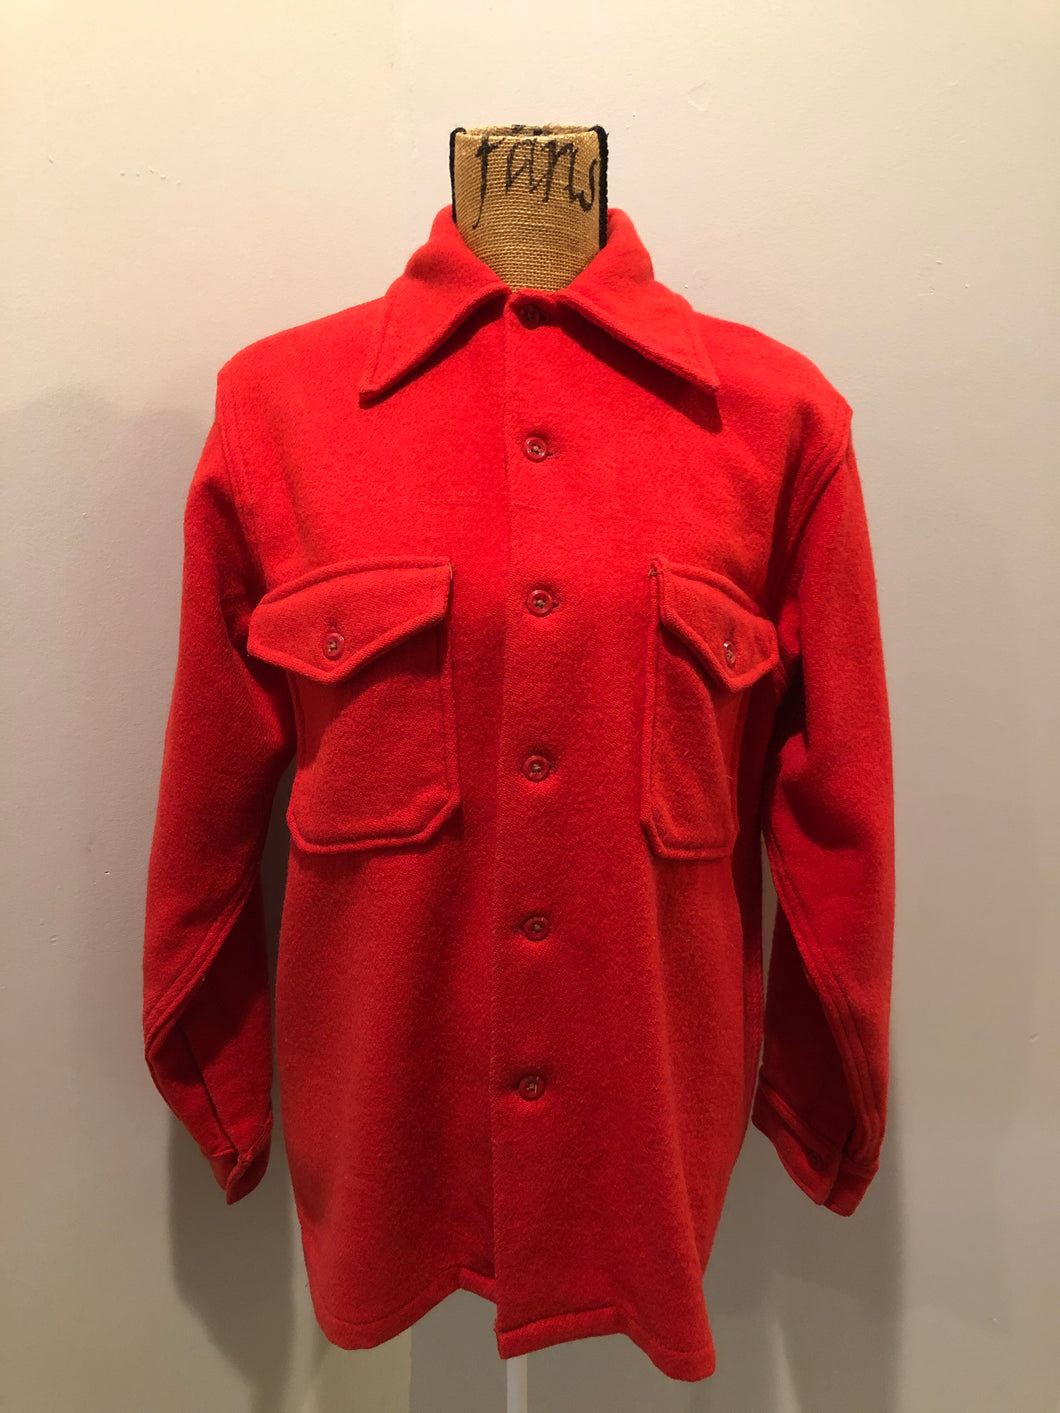 Kingspier Vintage - Soo Wool vibrant red lumberjack shirt with button closures and two flap pockets on the chest. Made in the USA.